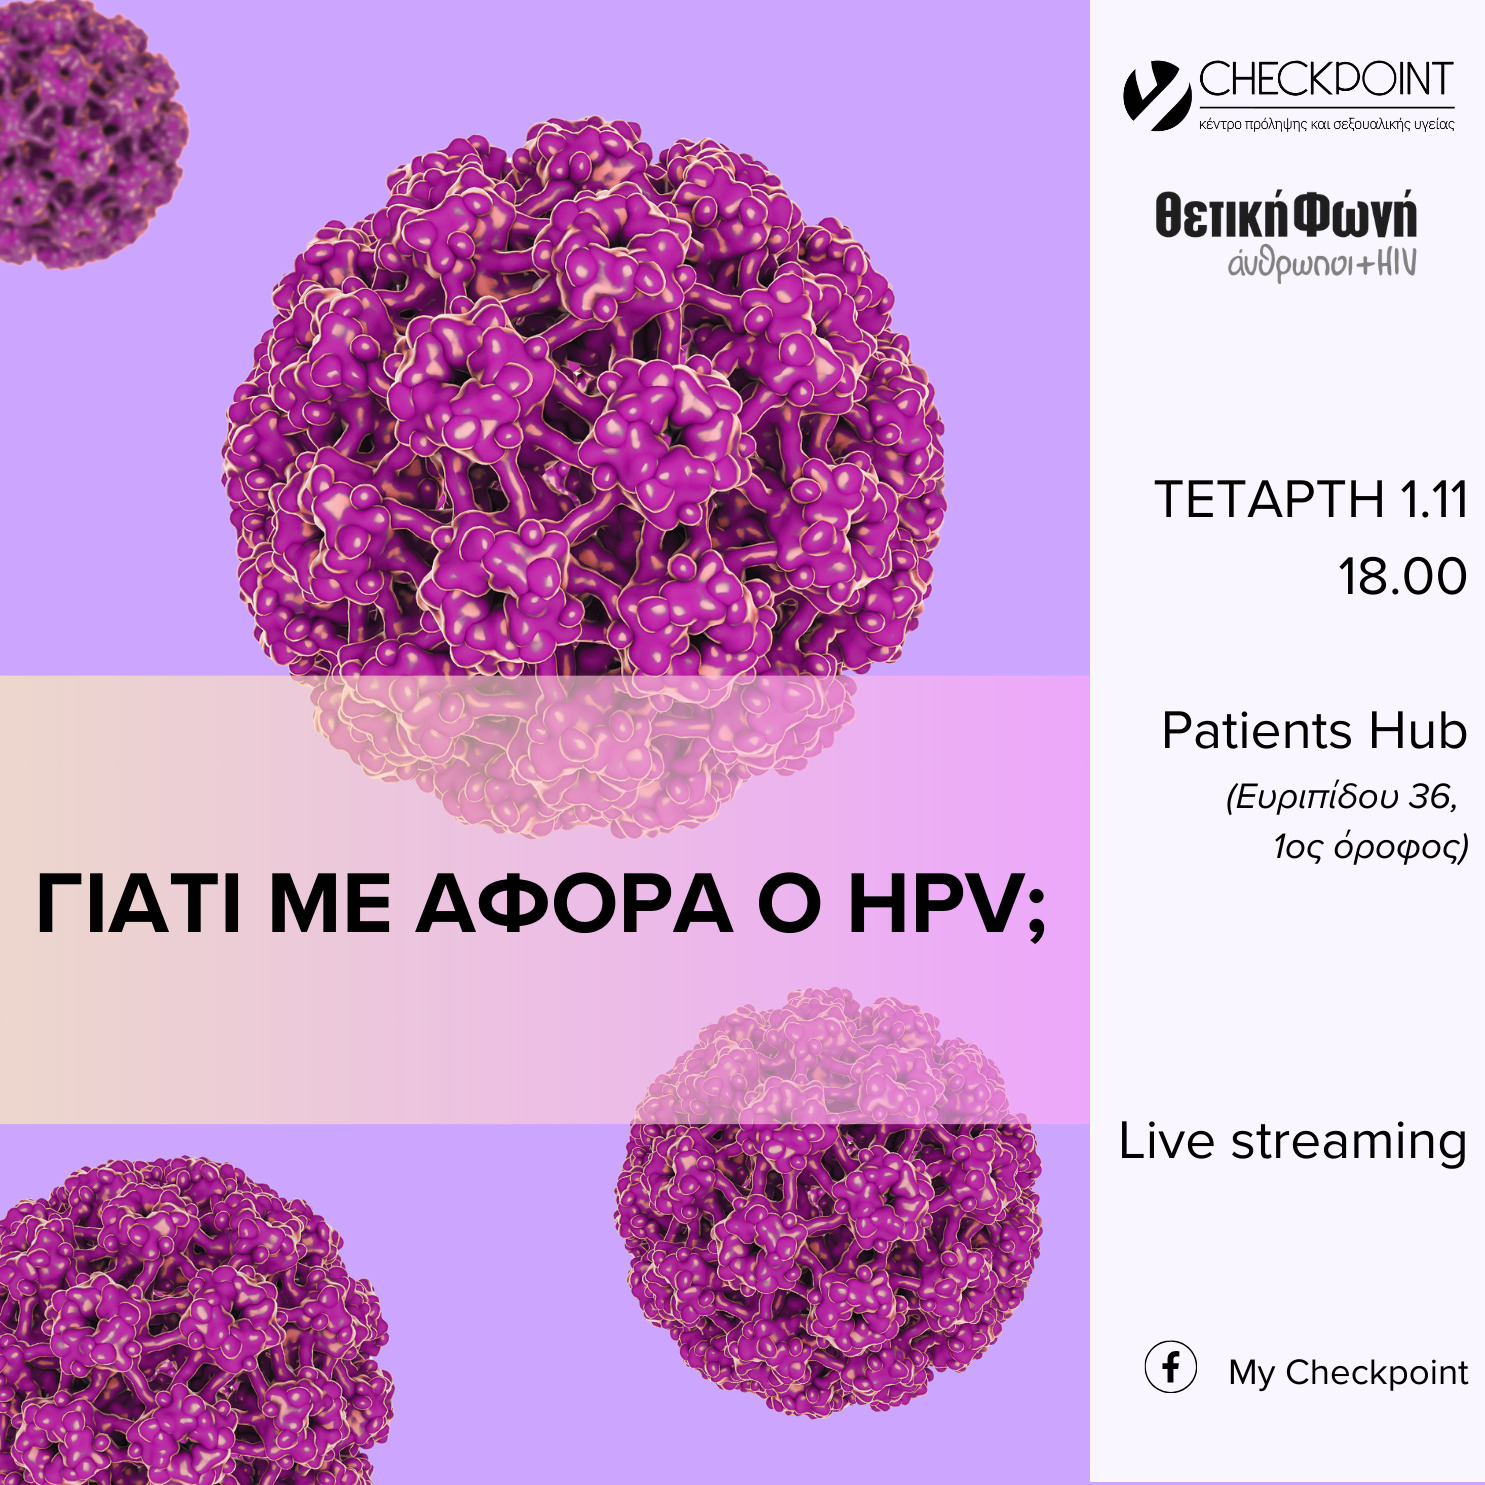 Featured image for “Γιατί με αφορά ο HPV; | Τετάρτη 1η Νοεμβρίου, 18.00”